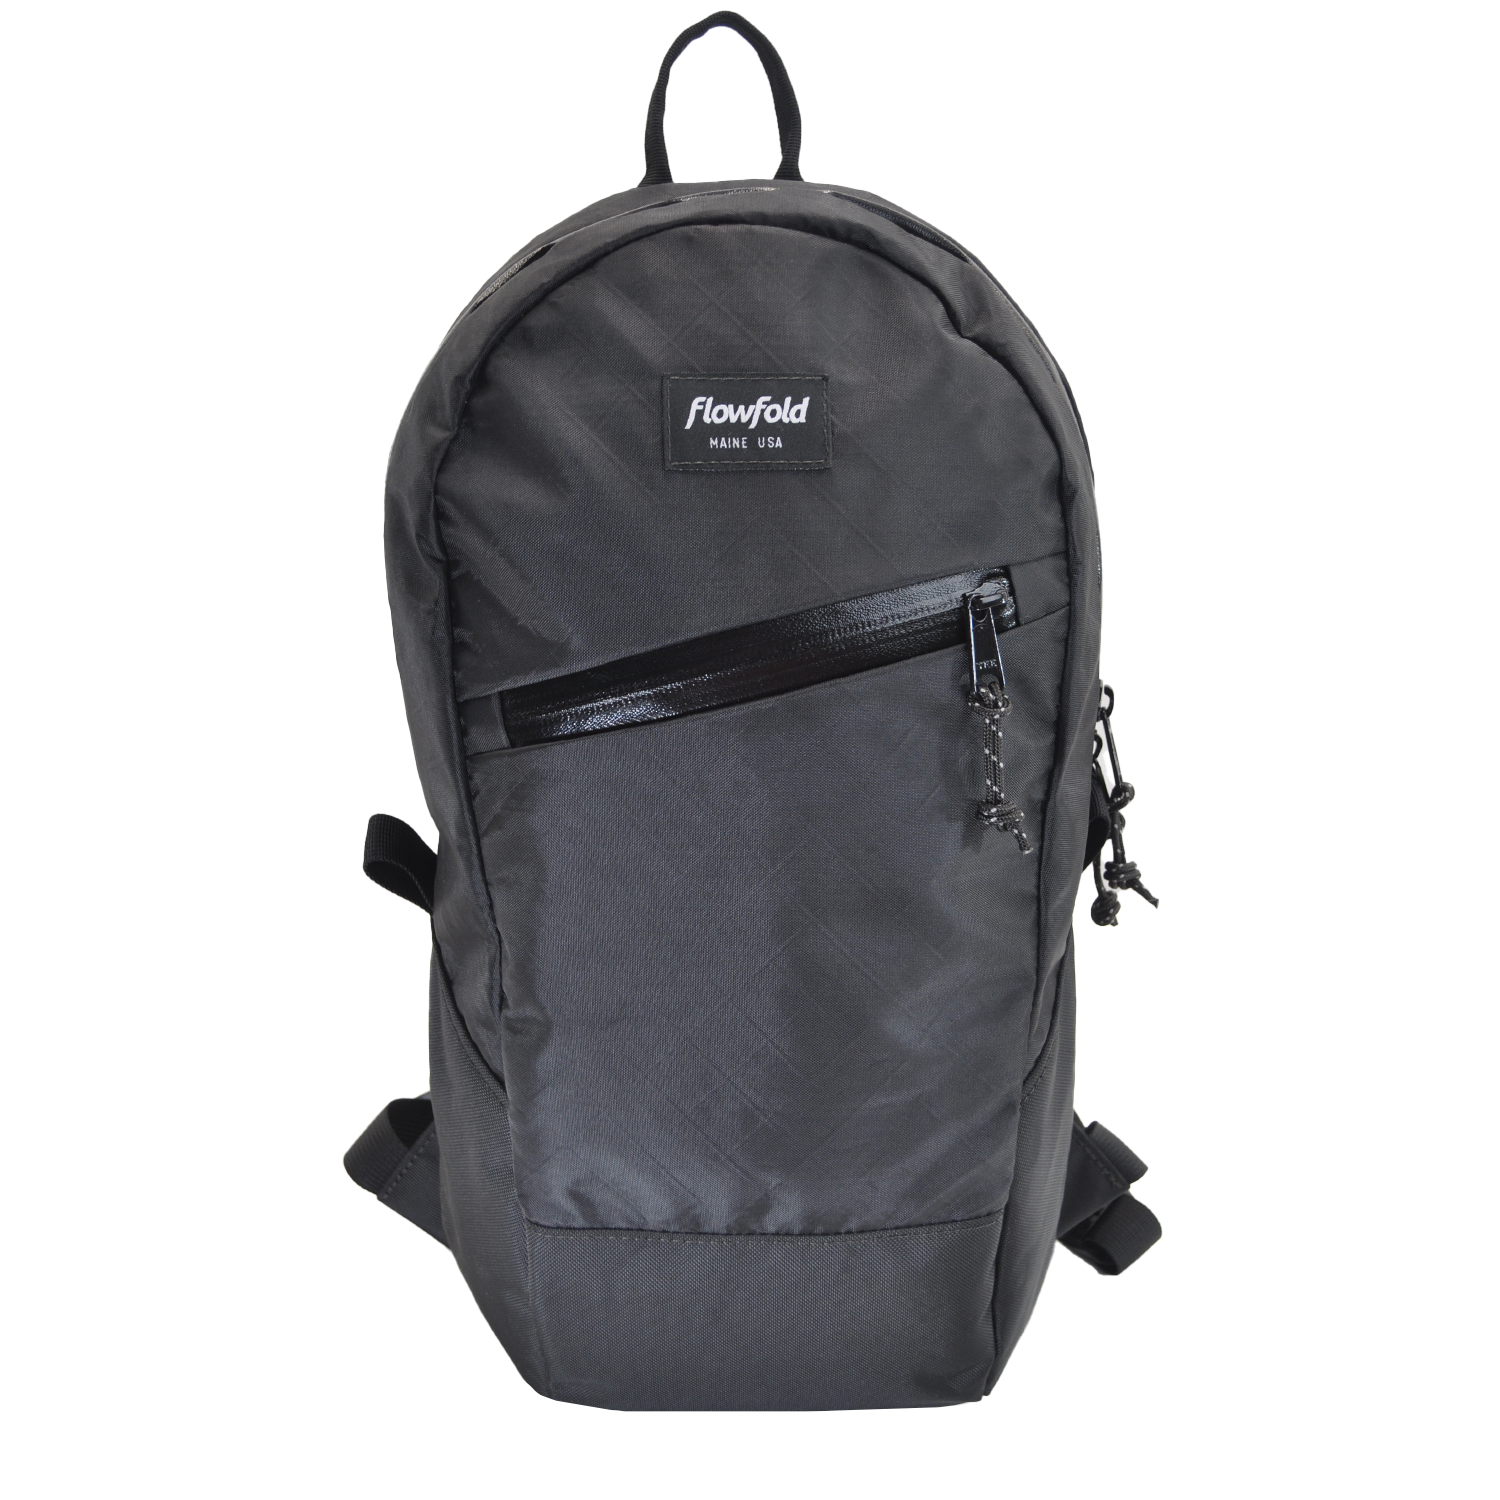 Flowfold Jet Black Optimist 10L Mini Day Backpack with Front Zipper Pocket Made in USA Black Recycled EcoPak Material